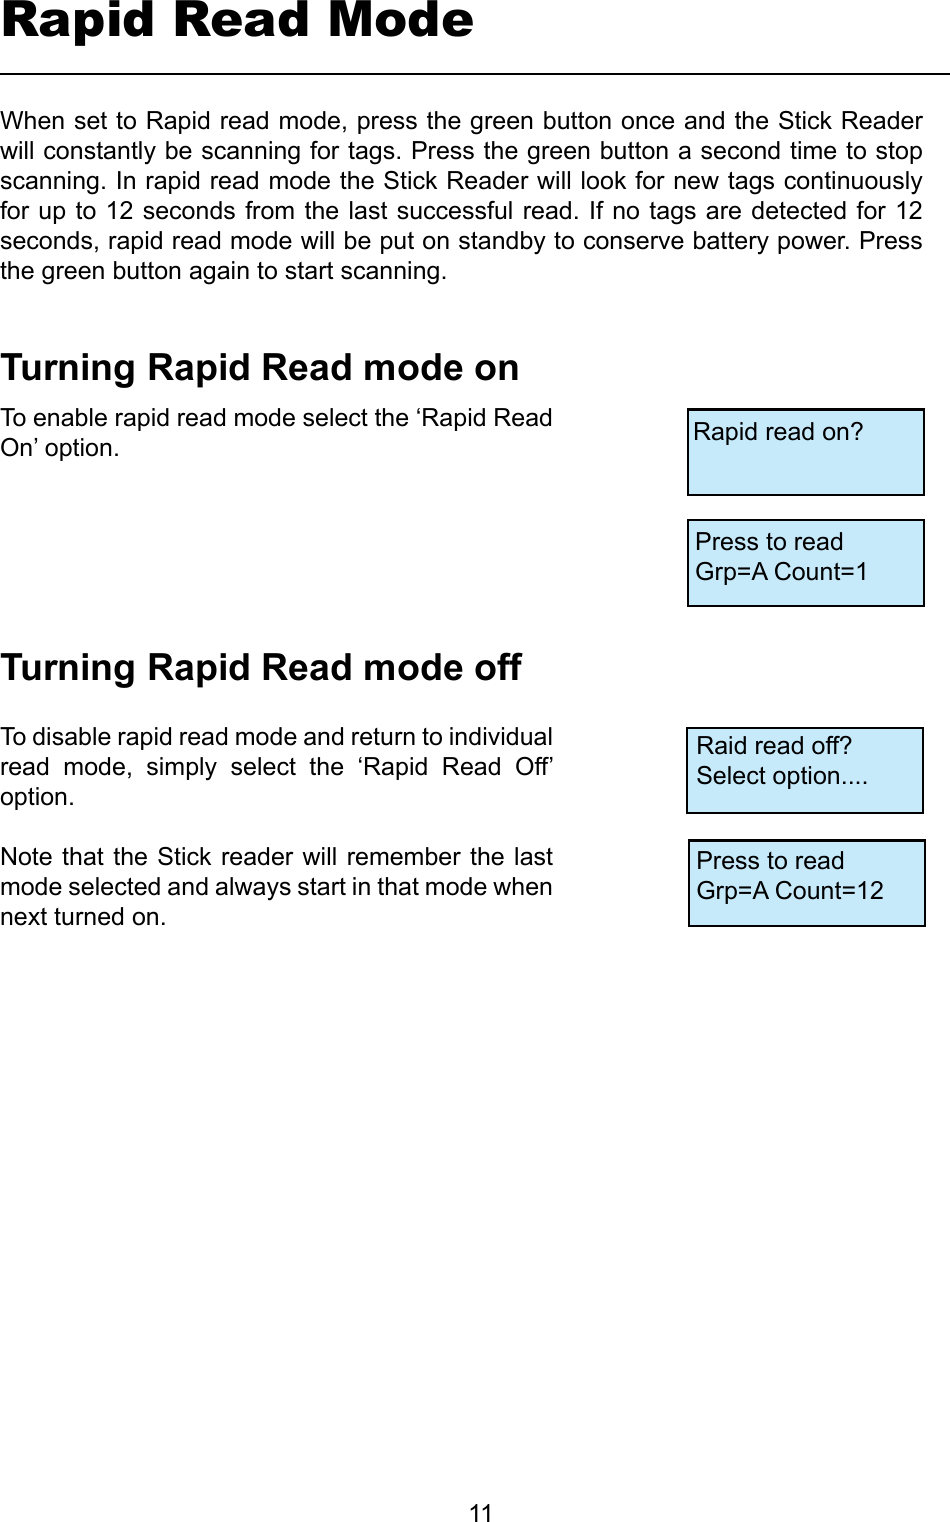         11Rapid Read ModeTurningRapidReadmodeonTurningRapidReadmodeoffTo enable rapid read mode select the ‘Rapid Read On’ option.To disable rapid read mode and return to individual read  mode,  simply  select  the  ‘Rapid  Read  Off’ option.Note that the Stick reader will remember the last mode selected and always start in that mode when next turned on.When set to Rapid read mode, press the green button once and the Stick Reader will constantly be scanning for tags. Press the green button a second time to stop scanning. In rapid read mode the Stick Reader will look for new tags continuously for up to 12 seconds from the last successful read. If no tags are detected for 12 seconds, rapid read mode will be put on standby to conserve battery power. Press the green button again to start scanning.Rapid read on?Press to readGrp=A Count=1Raid read off?Select option....Press to readGrp=A Count=12